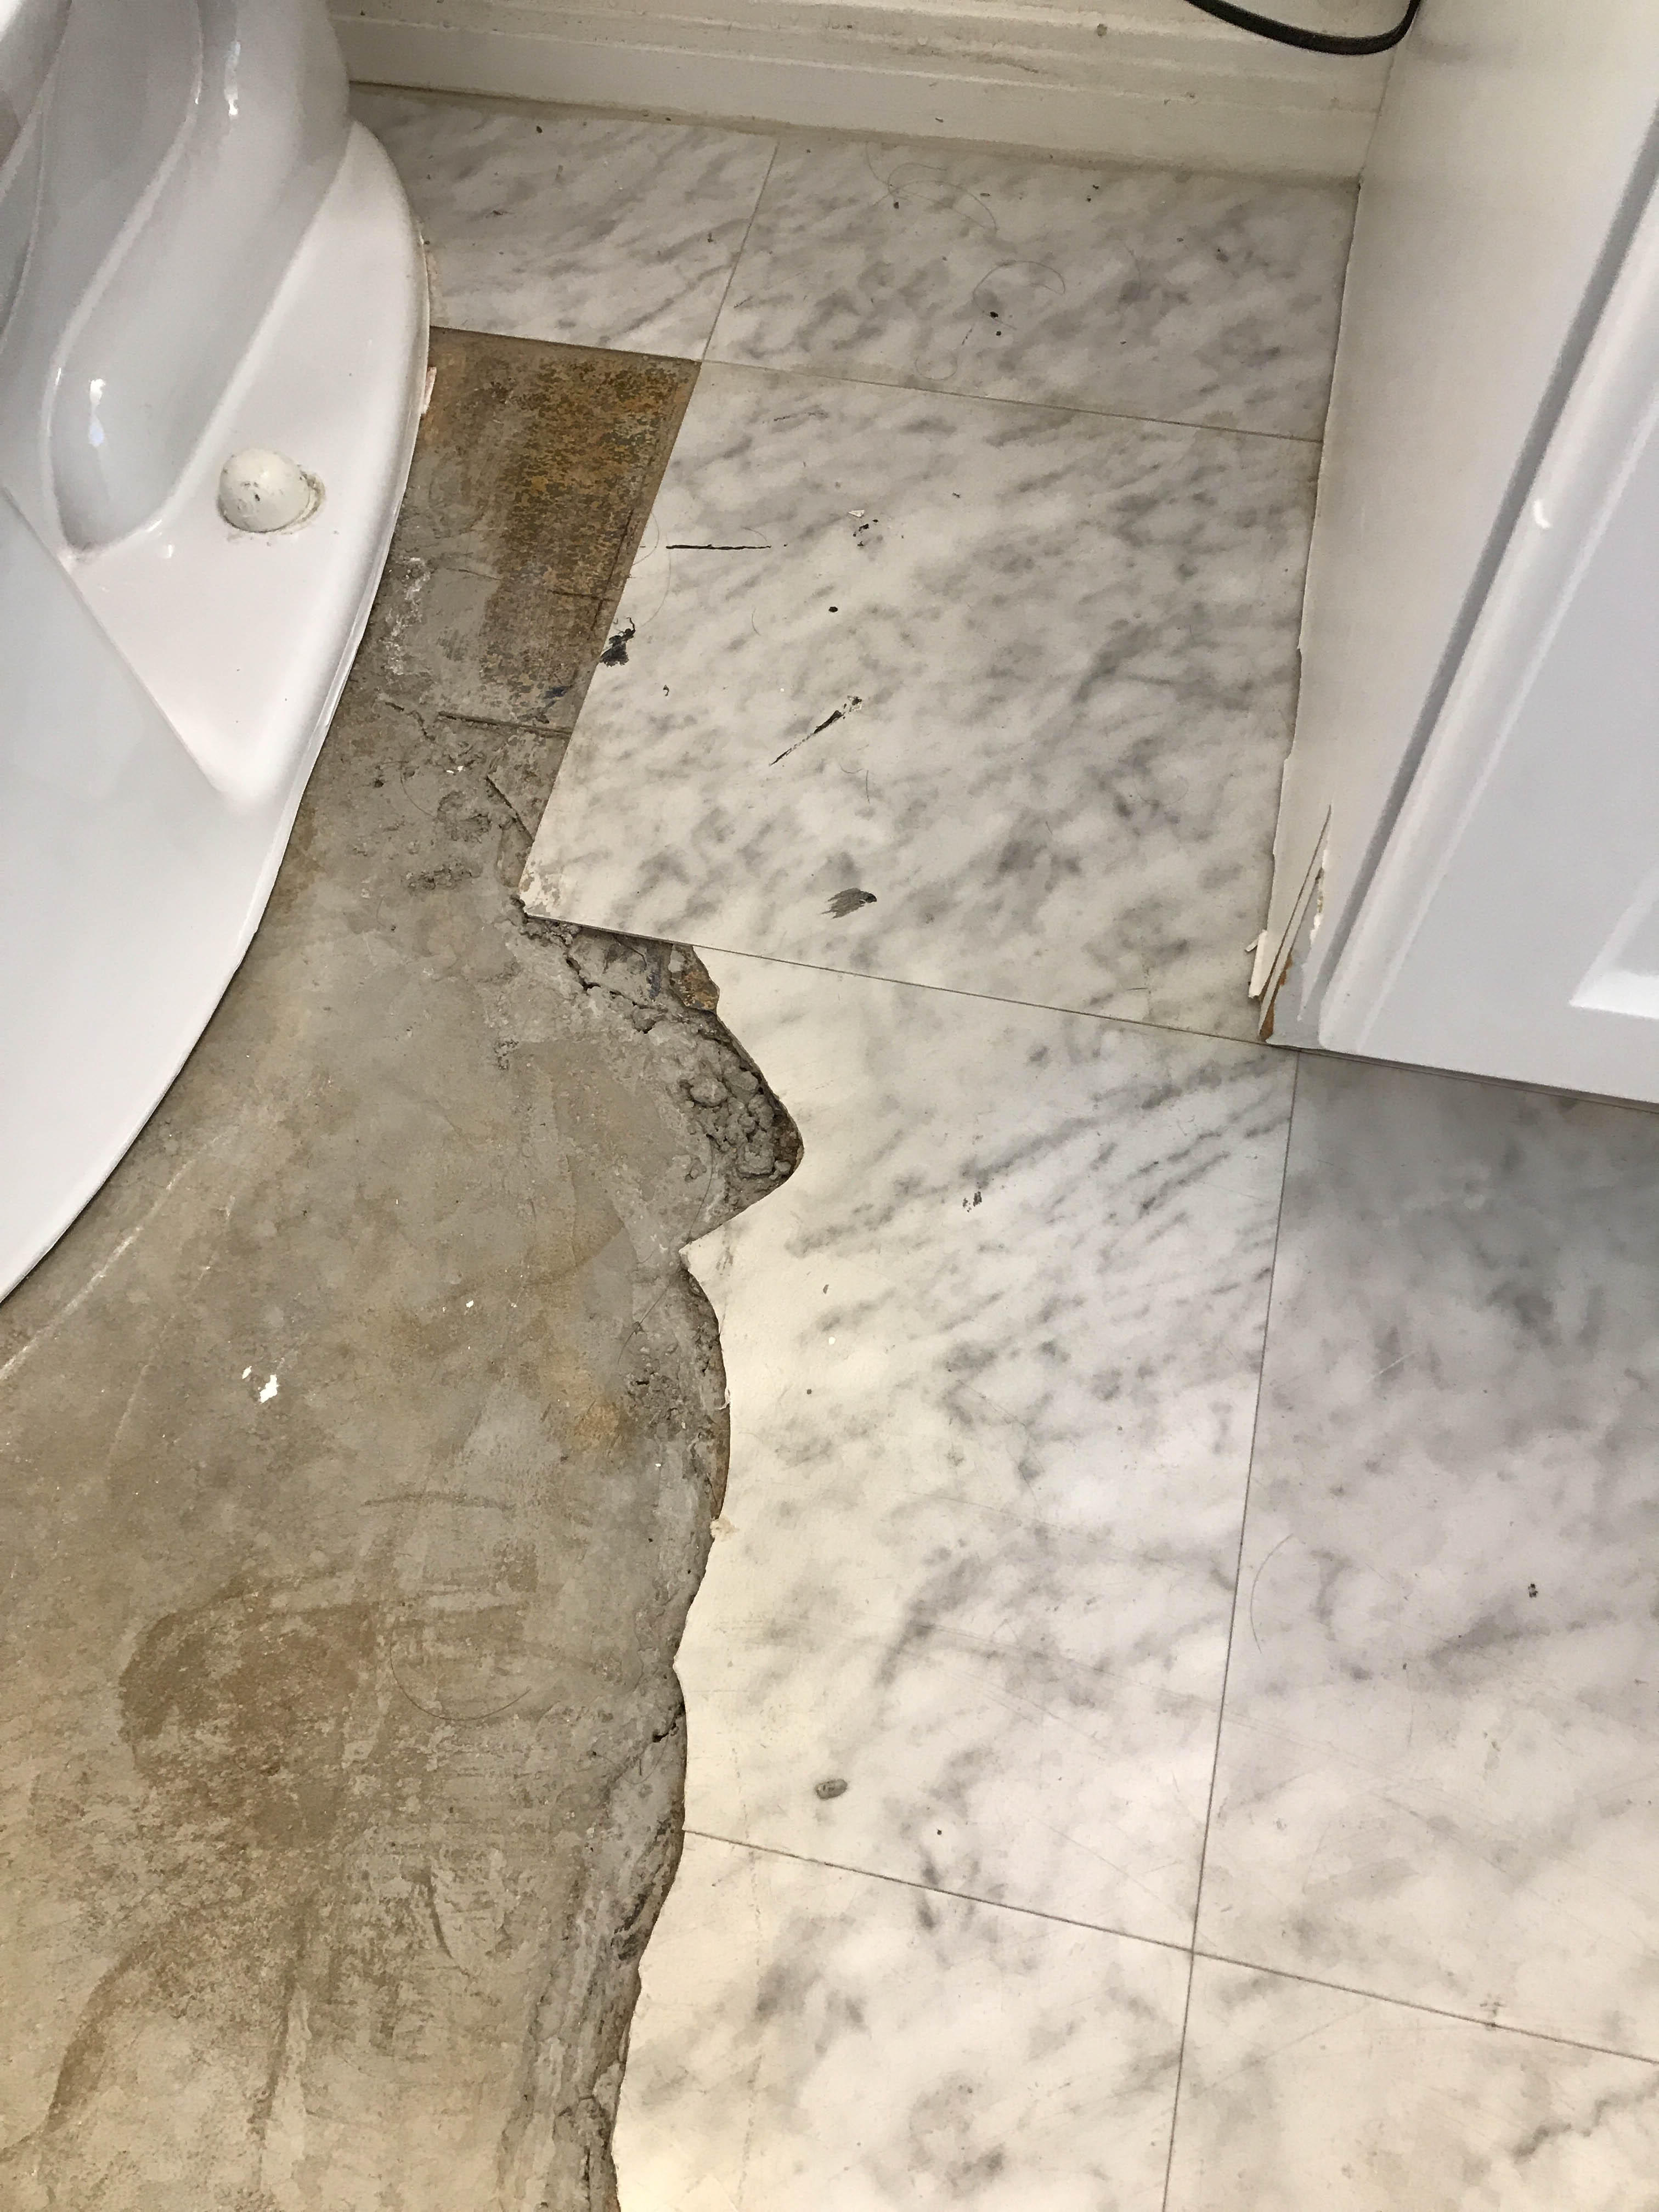 Leaking toilet cause water to go under the tile and needed to be removed in order to prevent mold growth.